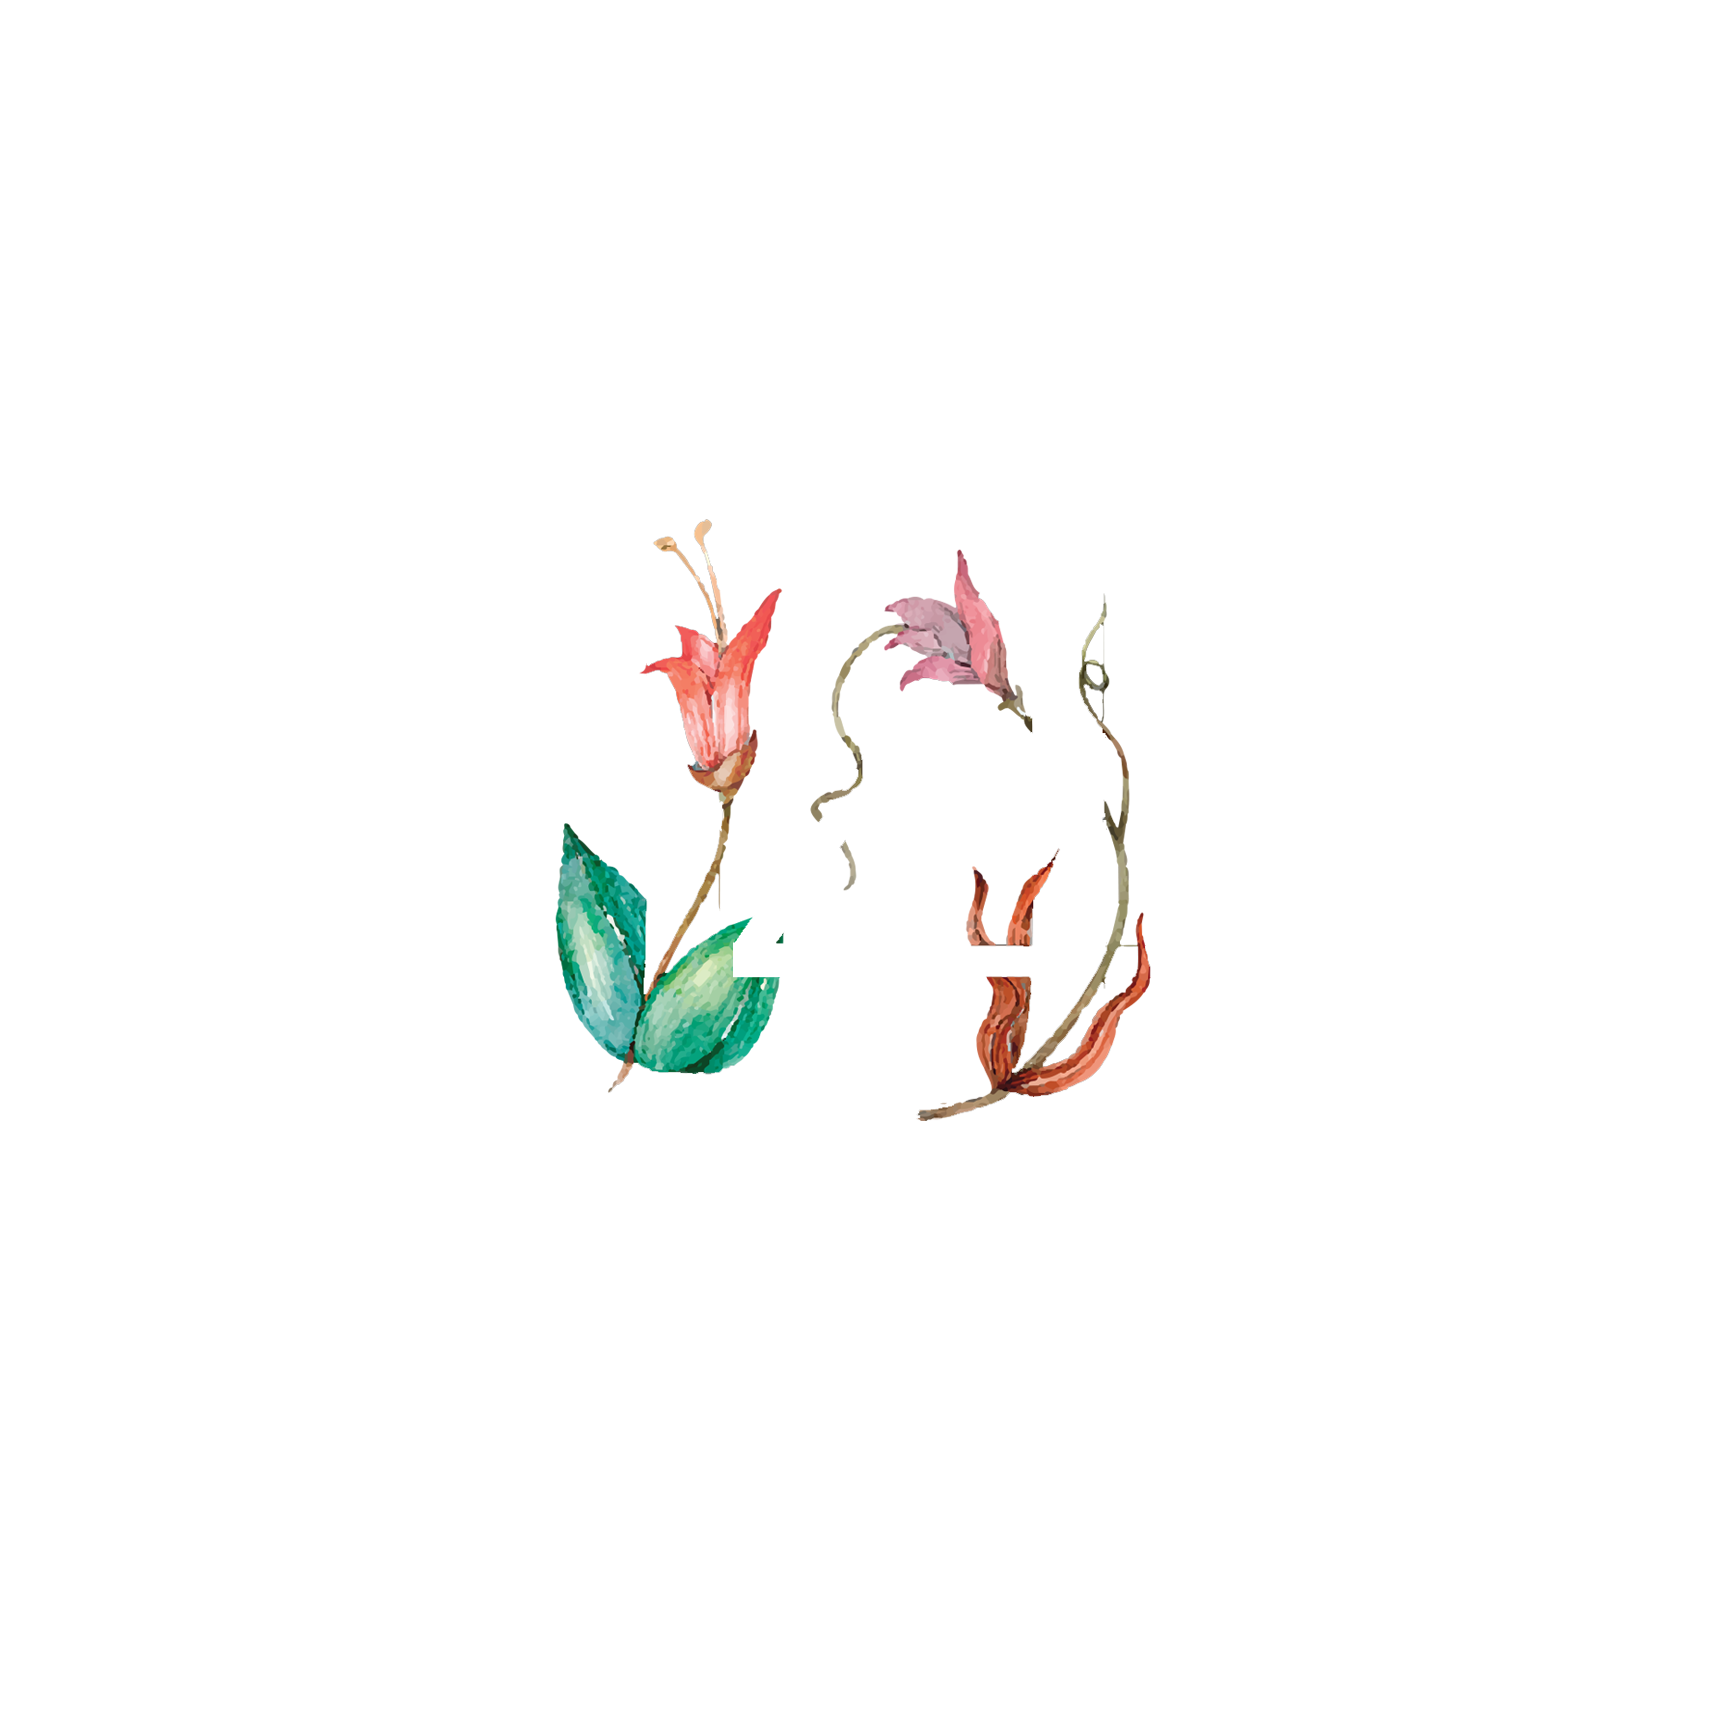 Click to read Day 14 - Reflecting